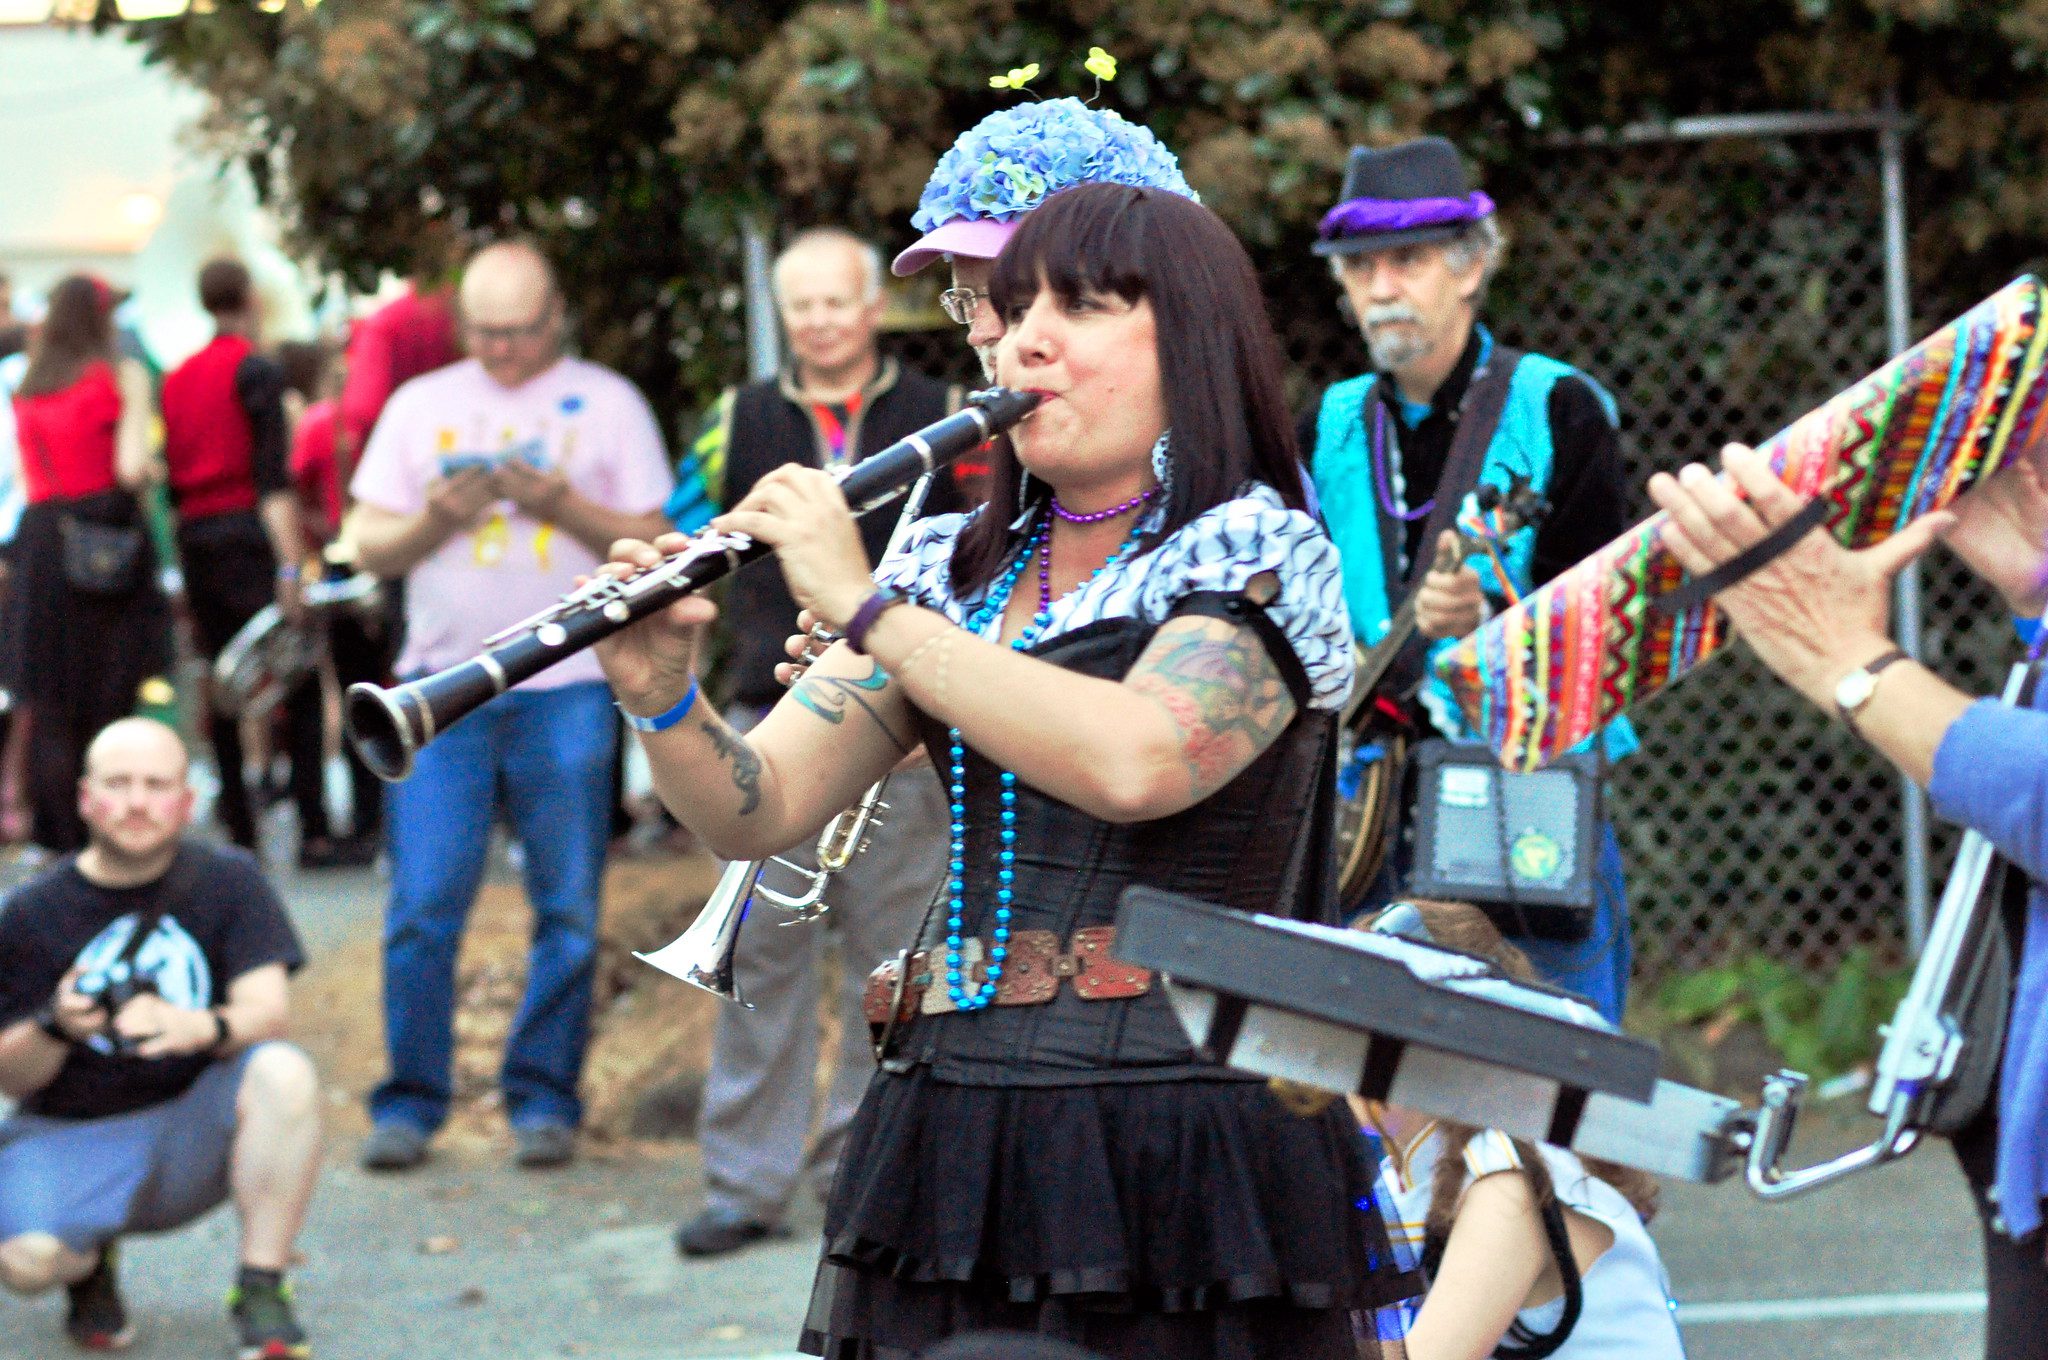 A woman and several other musicians play music at an outdoor community event.